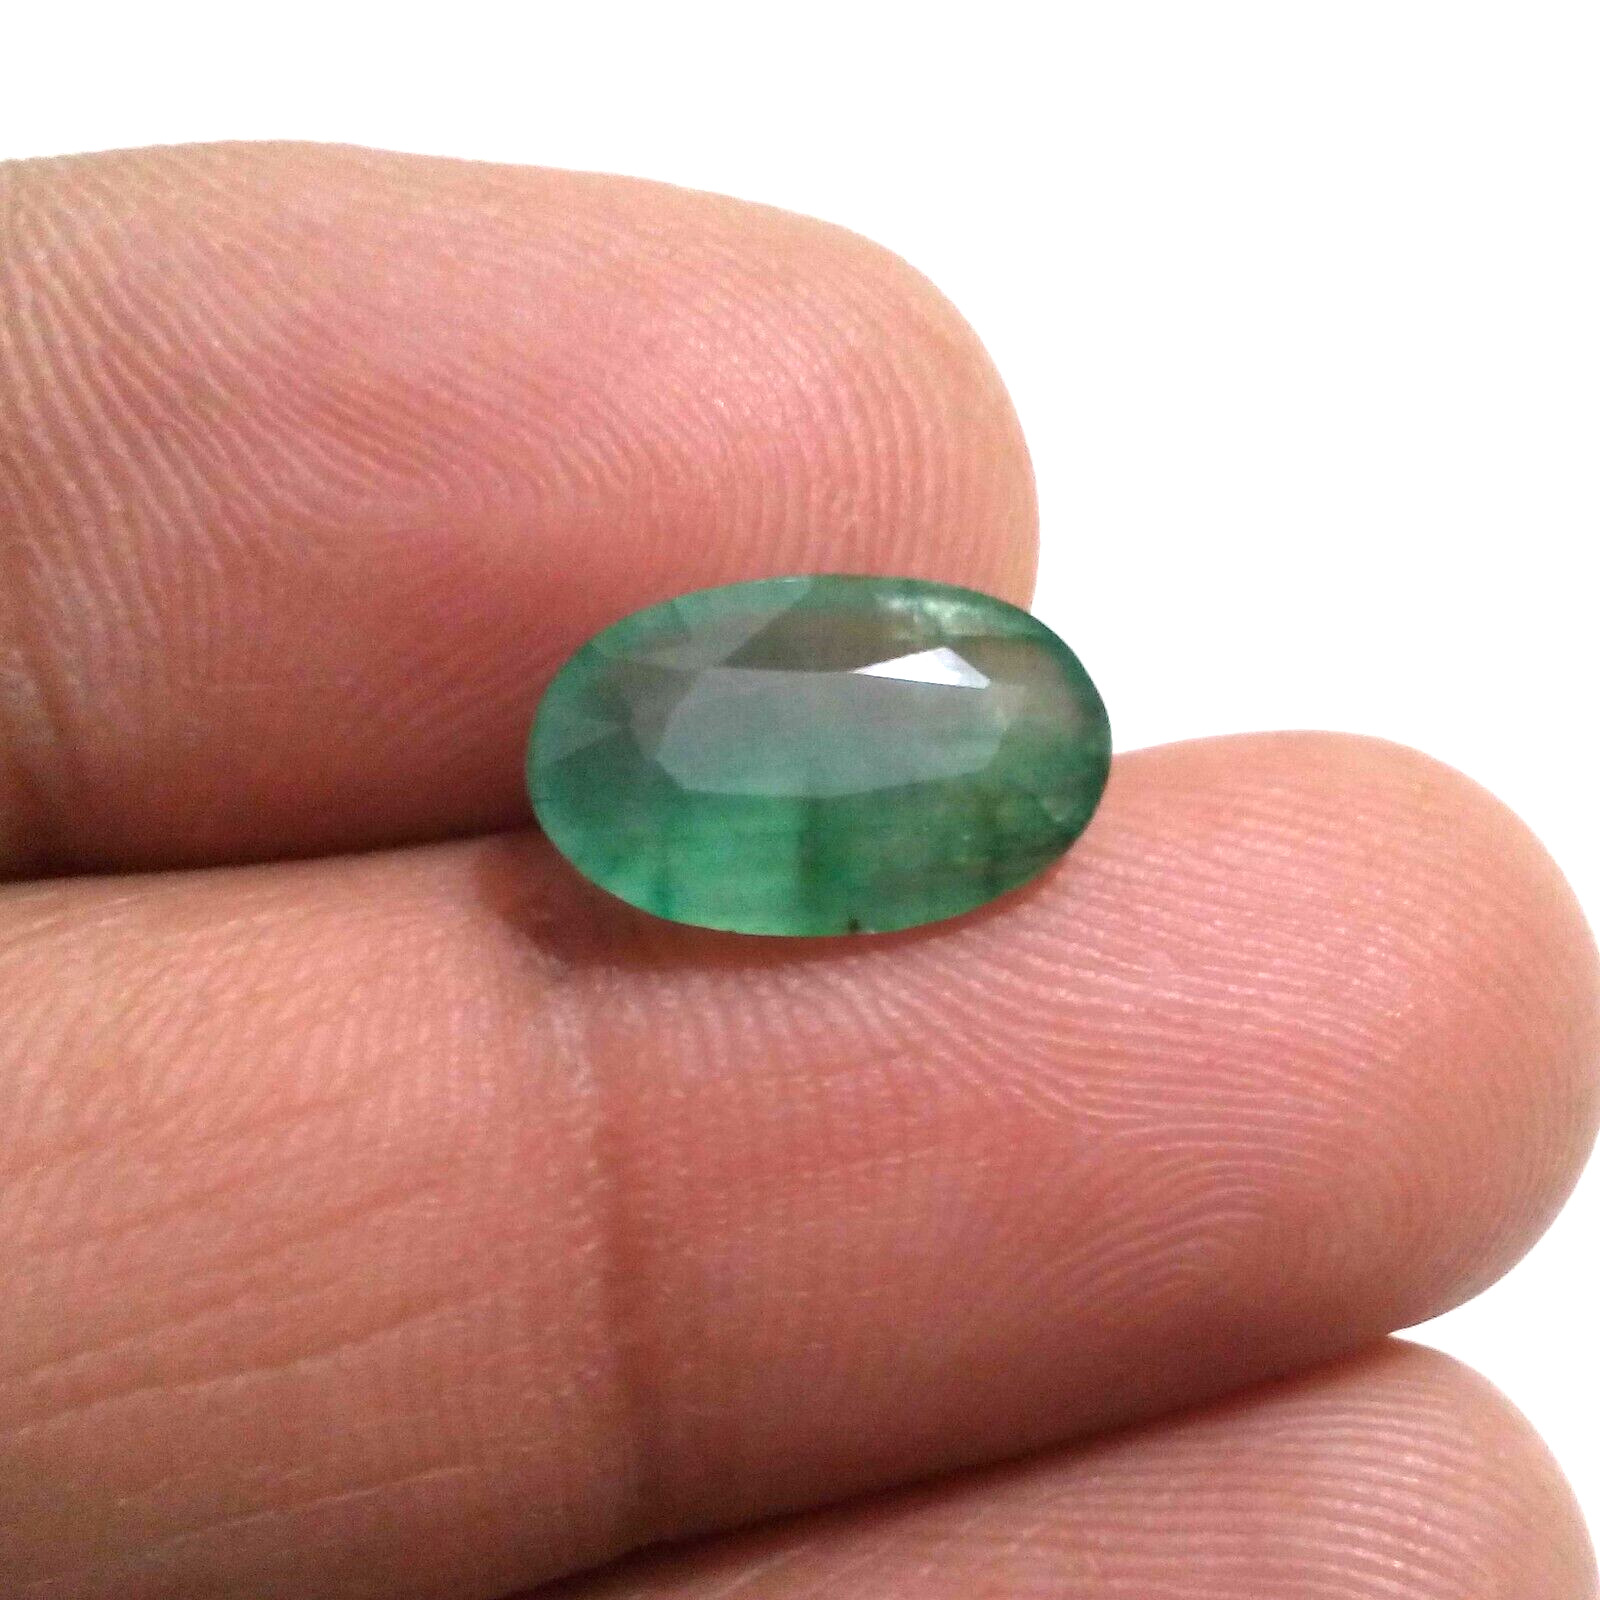 Outstanding Zambian Emerald Oval Shape 3.65 Crt Top Green Faceted Loose Gemstone